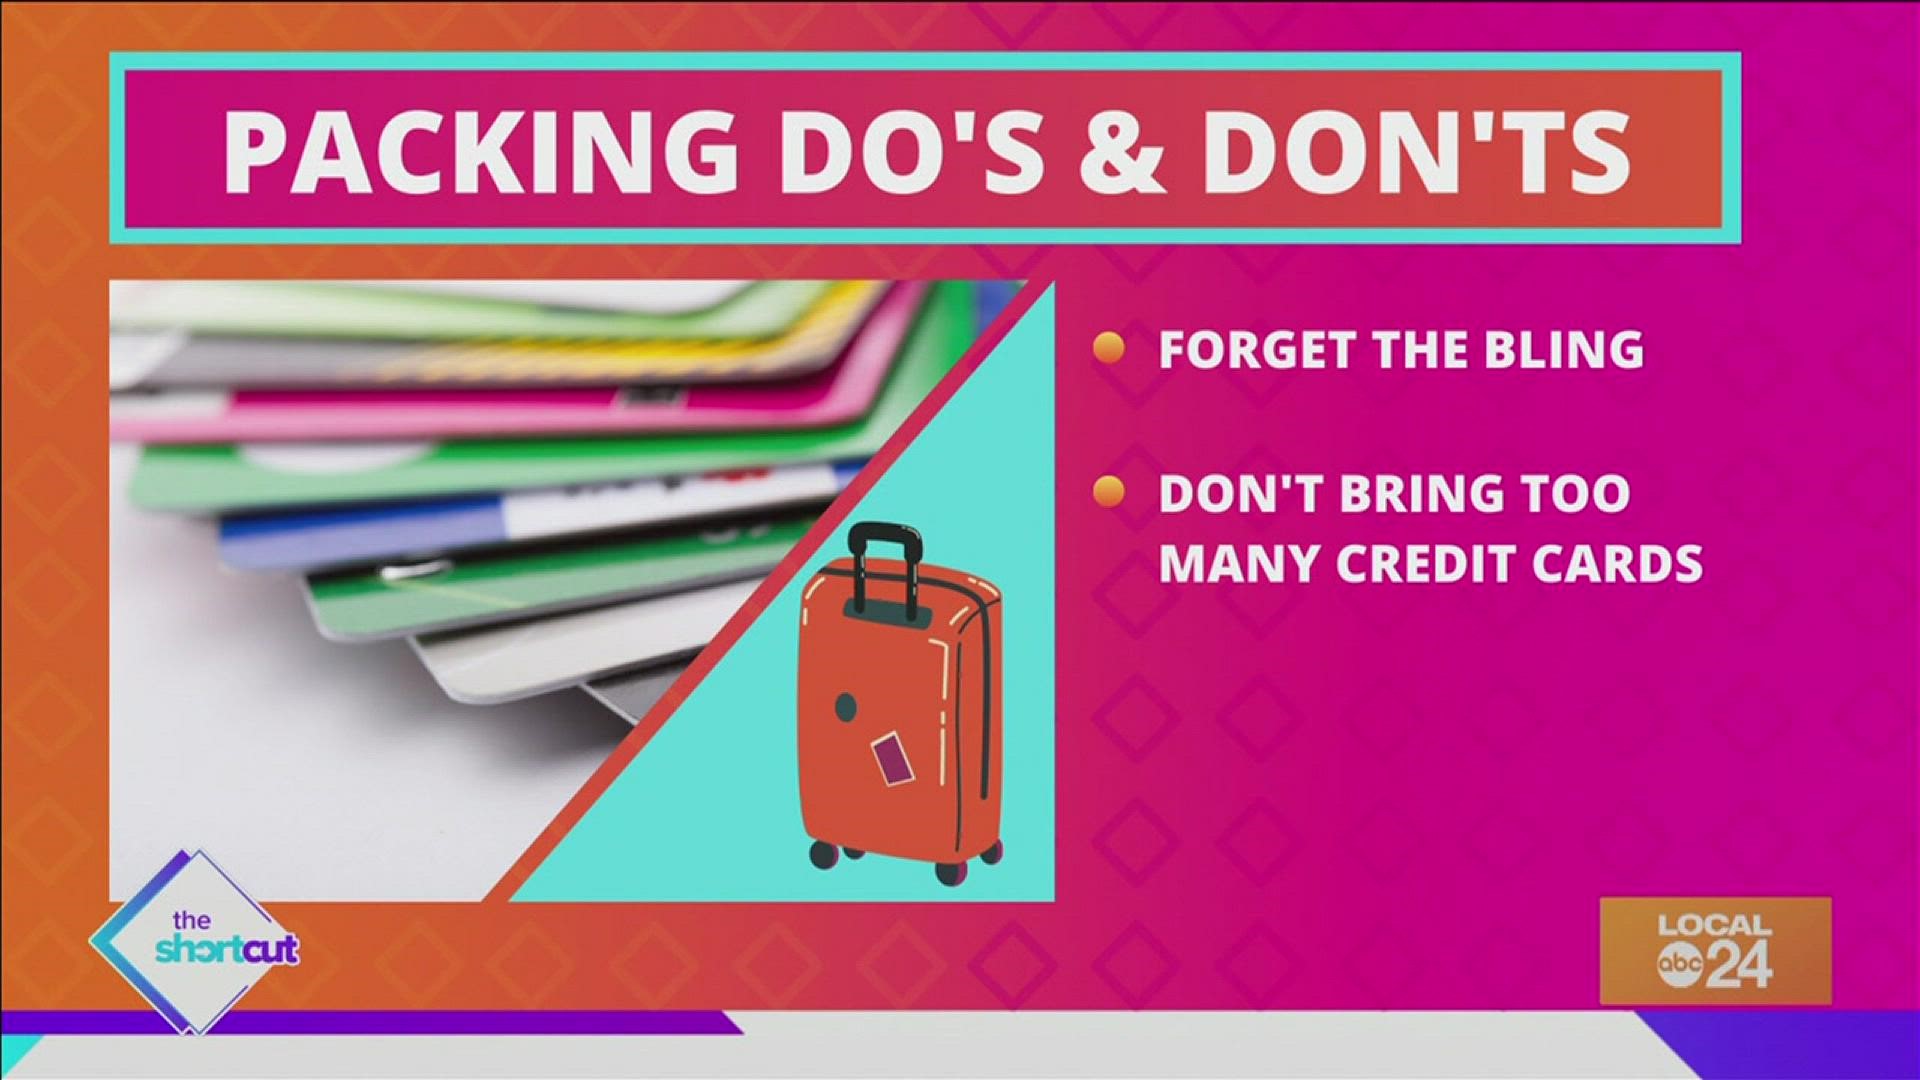 Stop paying unnecessary fees and check out these packing do's and don'ts! They'll make your travel experience better! Courtesy of Sydney Neely on "The Shortcut!"